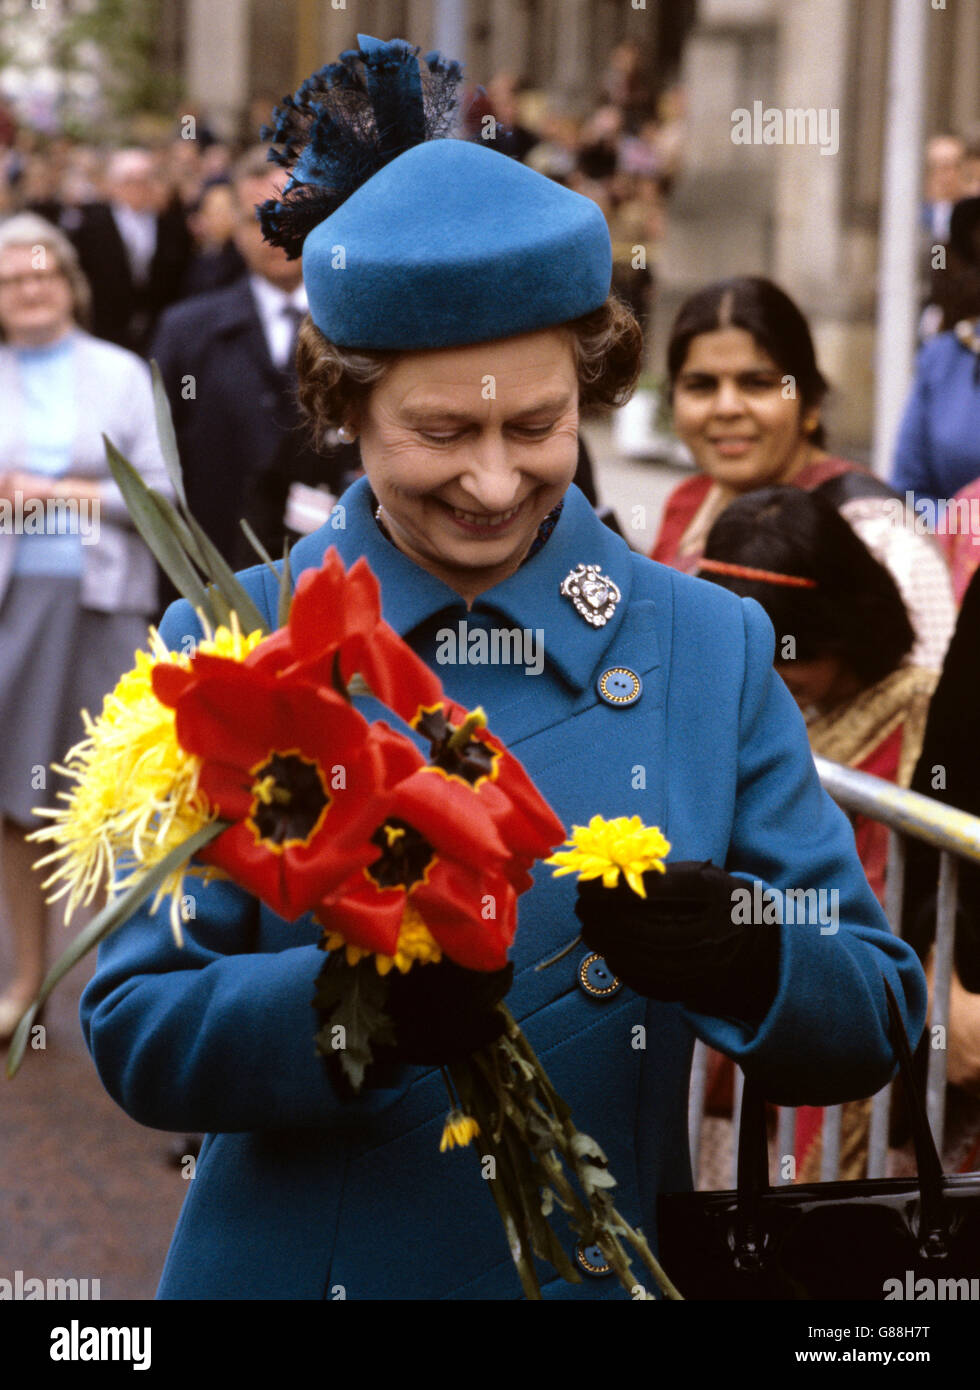 Queen Elizabeth II holding a bouquet during a walkabout in Manchester's Albert Square after she visited the TV 'Coronation Street' set. Stock Photo